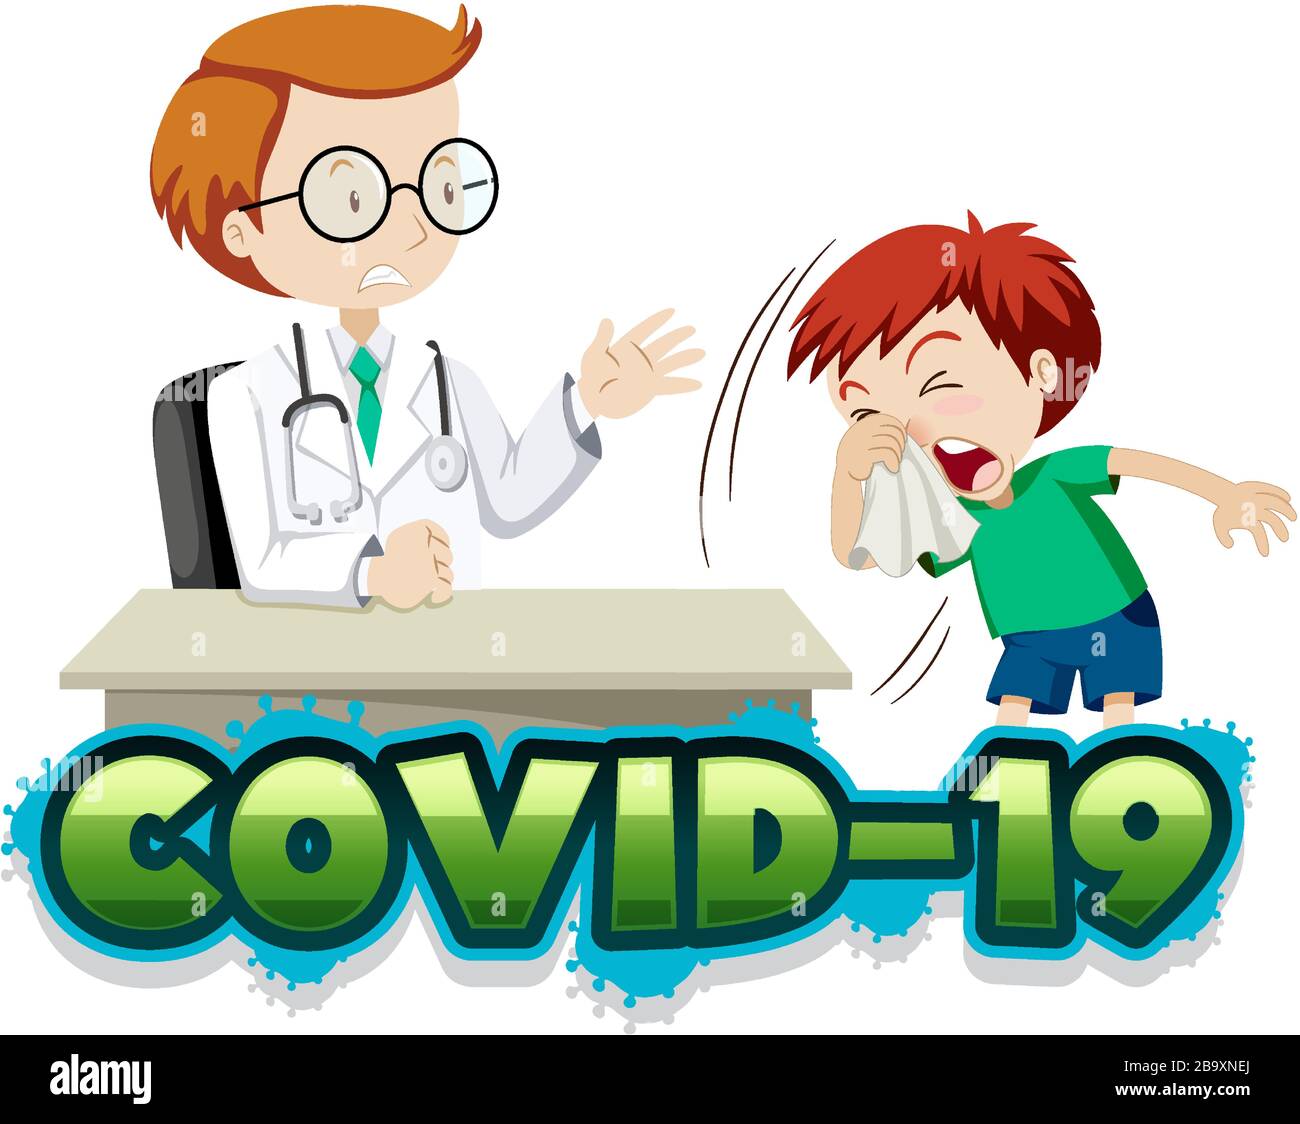 Covid 19 sign template with sick boy and doctor illustration Stock Vector